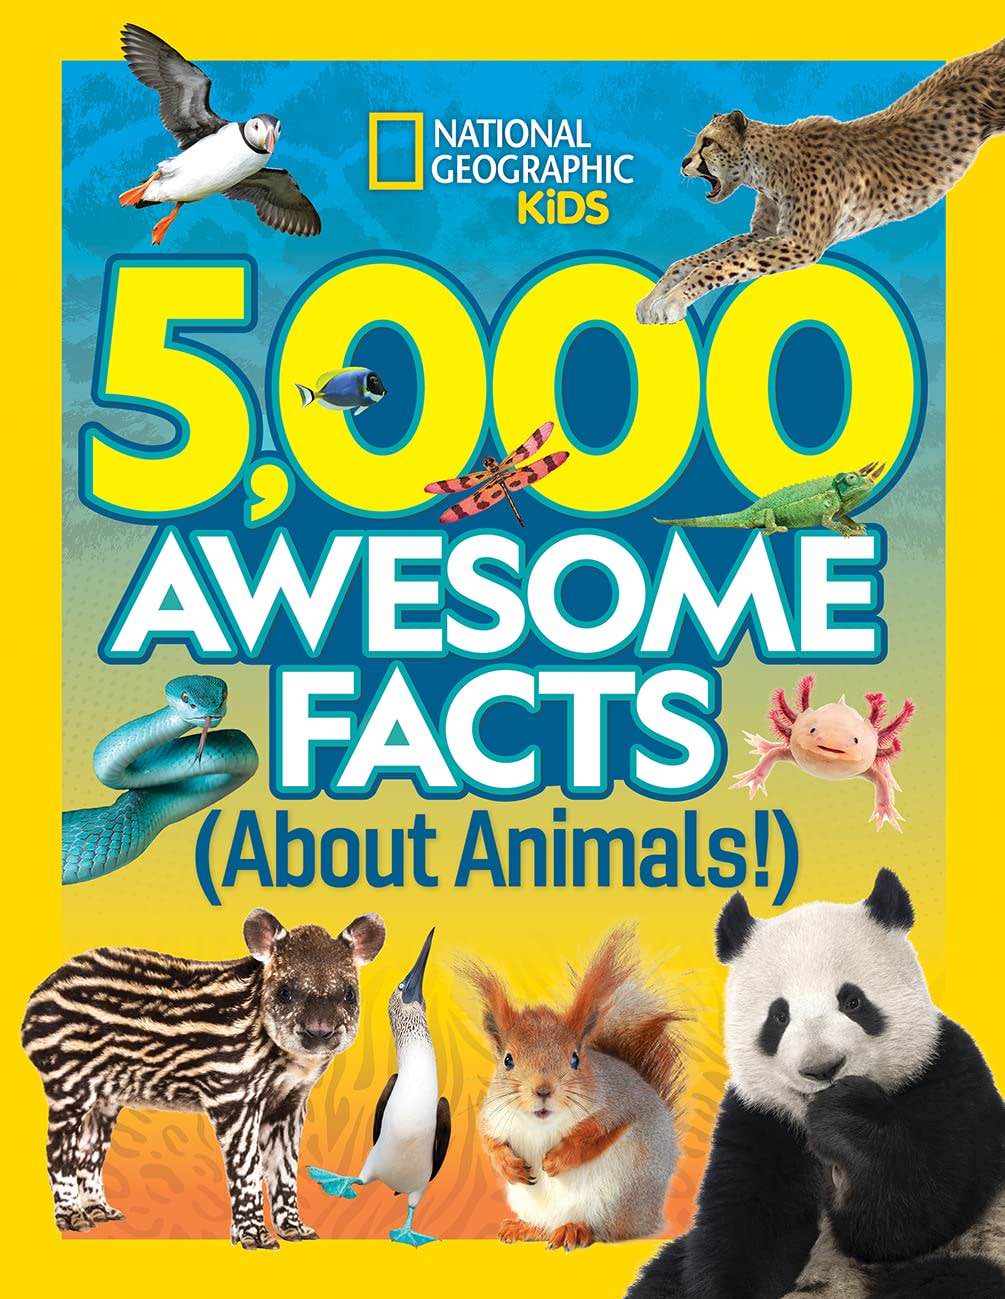 5000 awesome facts about animals